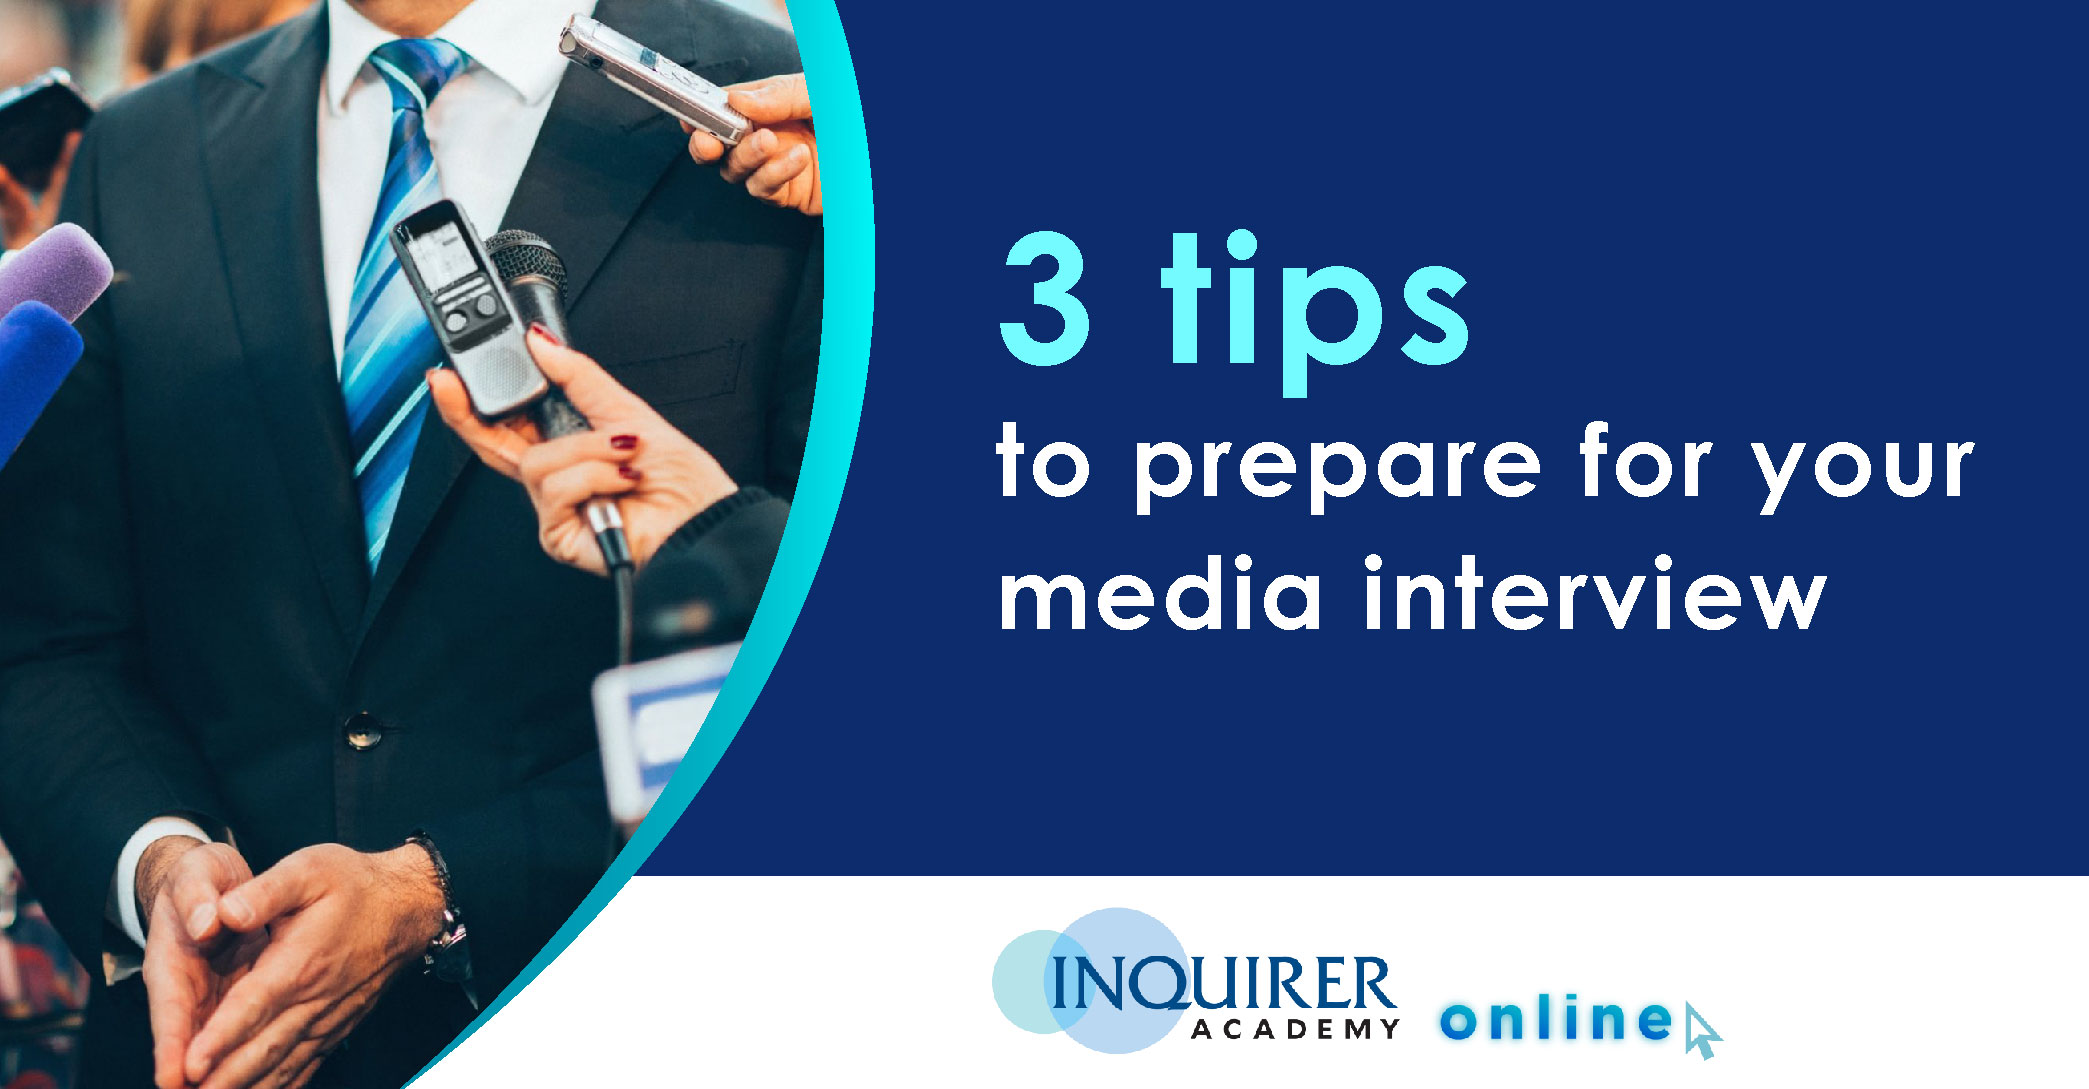 Facing the media? Here are 3 tips to prepare for your interview